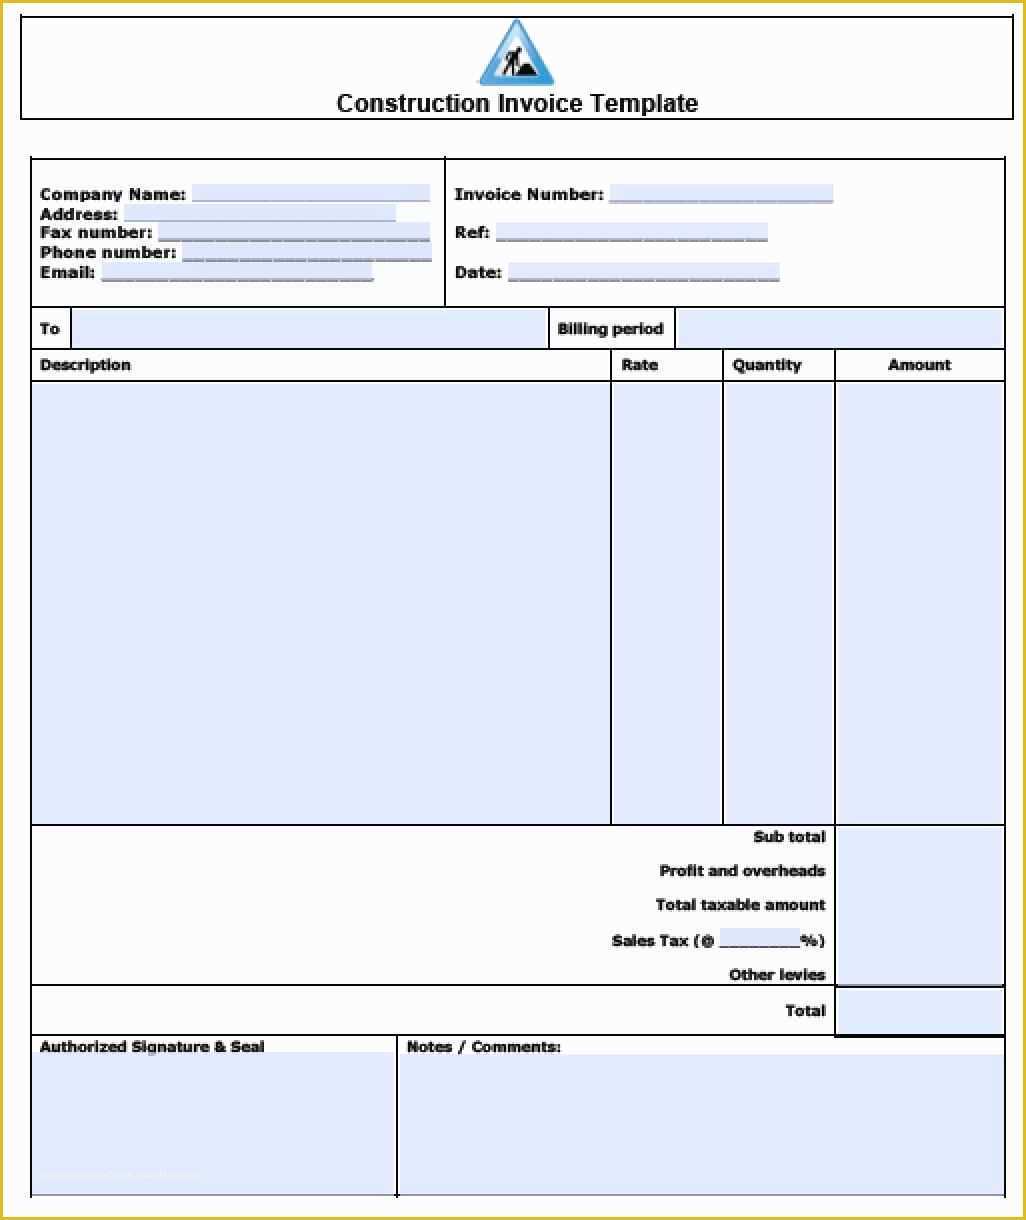 Construction Invoice Templates Free Download Of Independent Contractor Invoice Template Free Download and